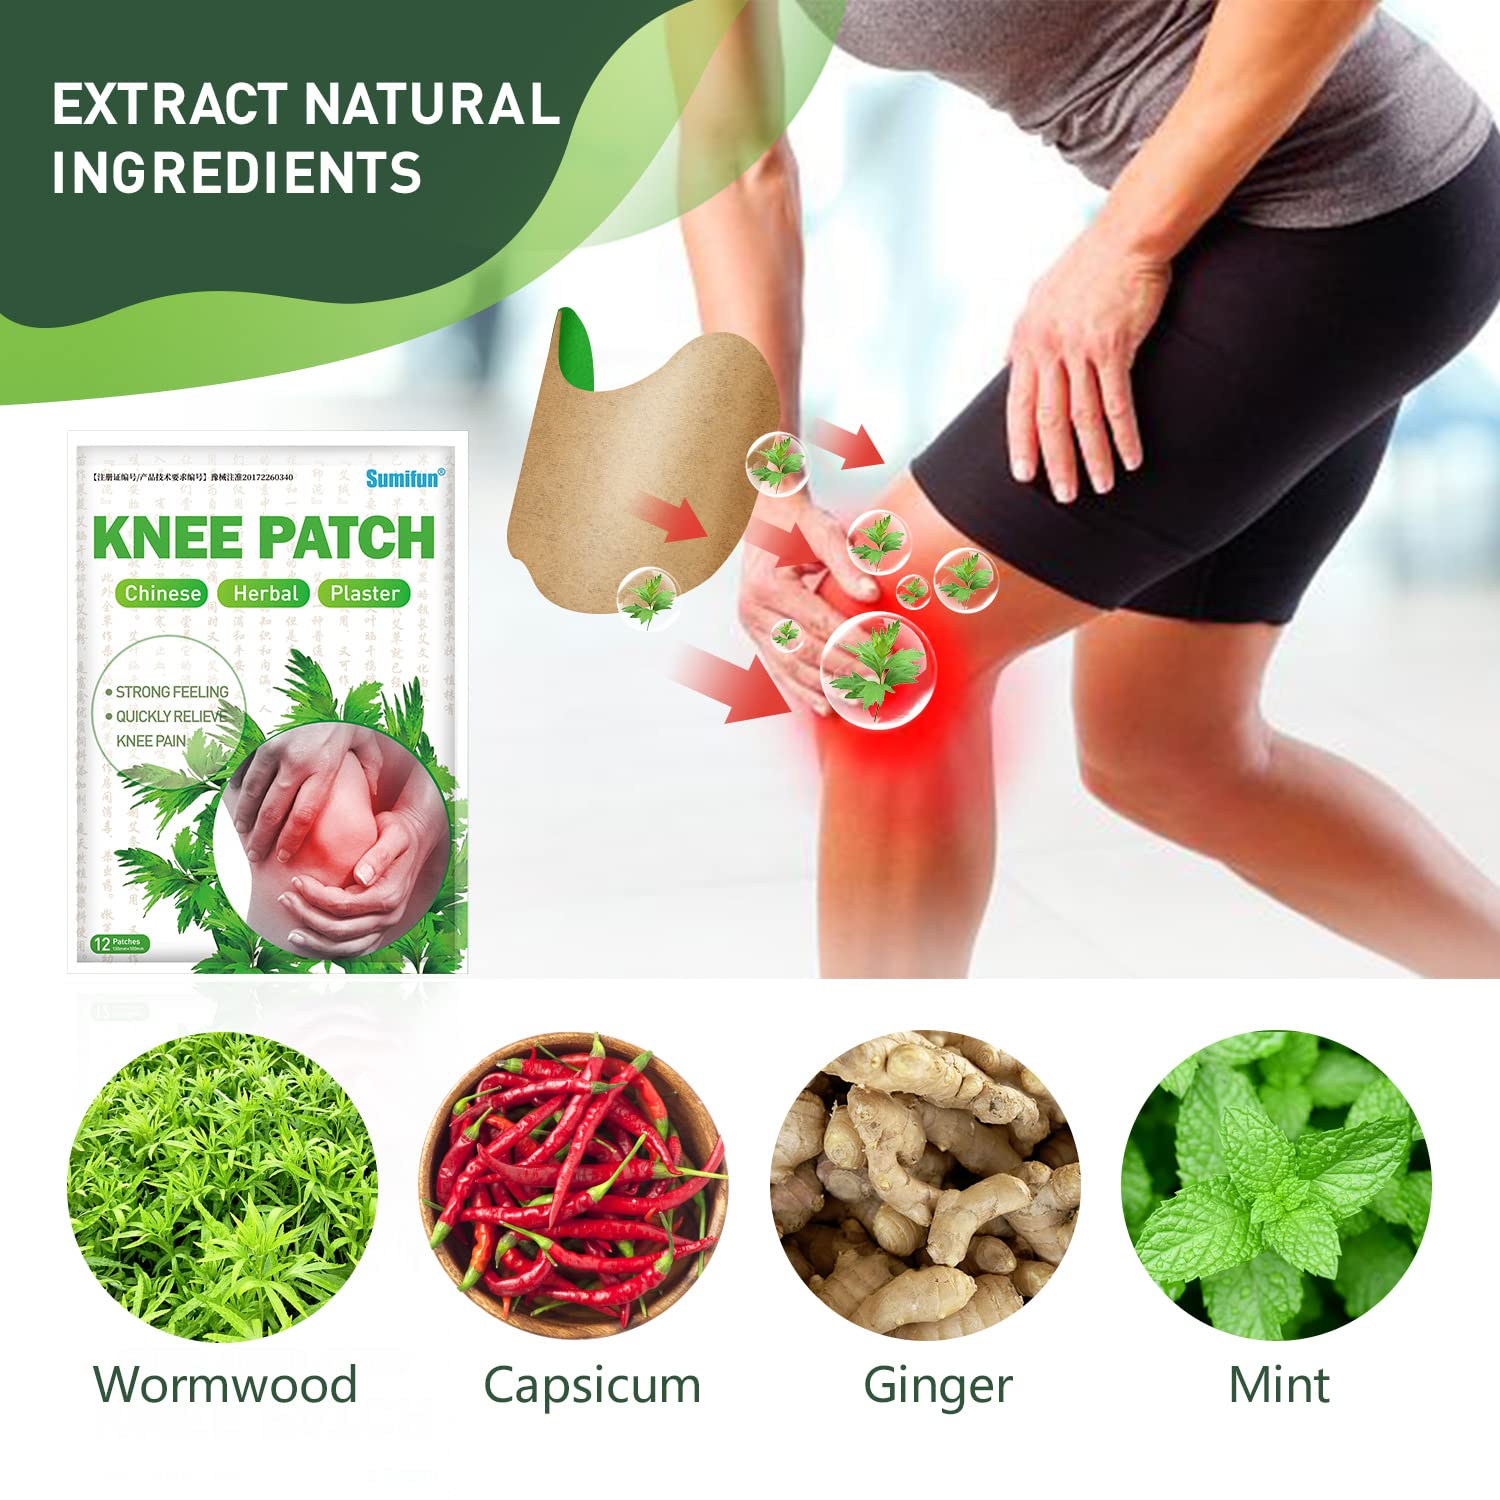 Natural Knee Pain Patch,Knee Joint Pain Relief Patchs - Herbal